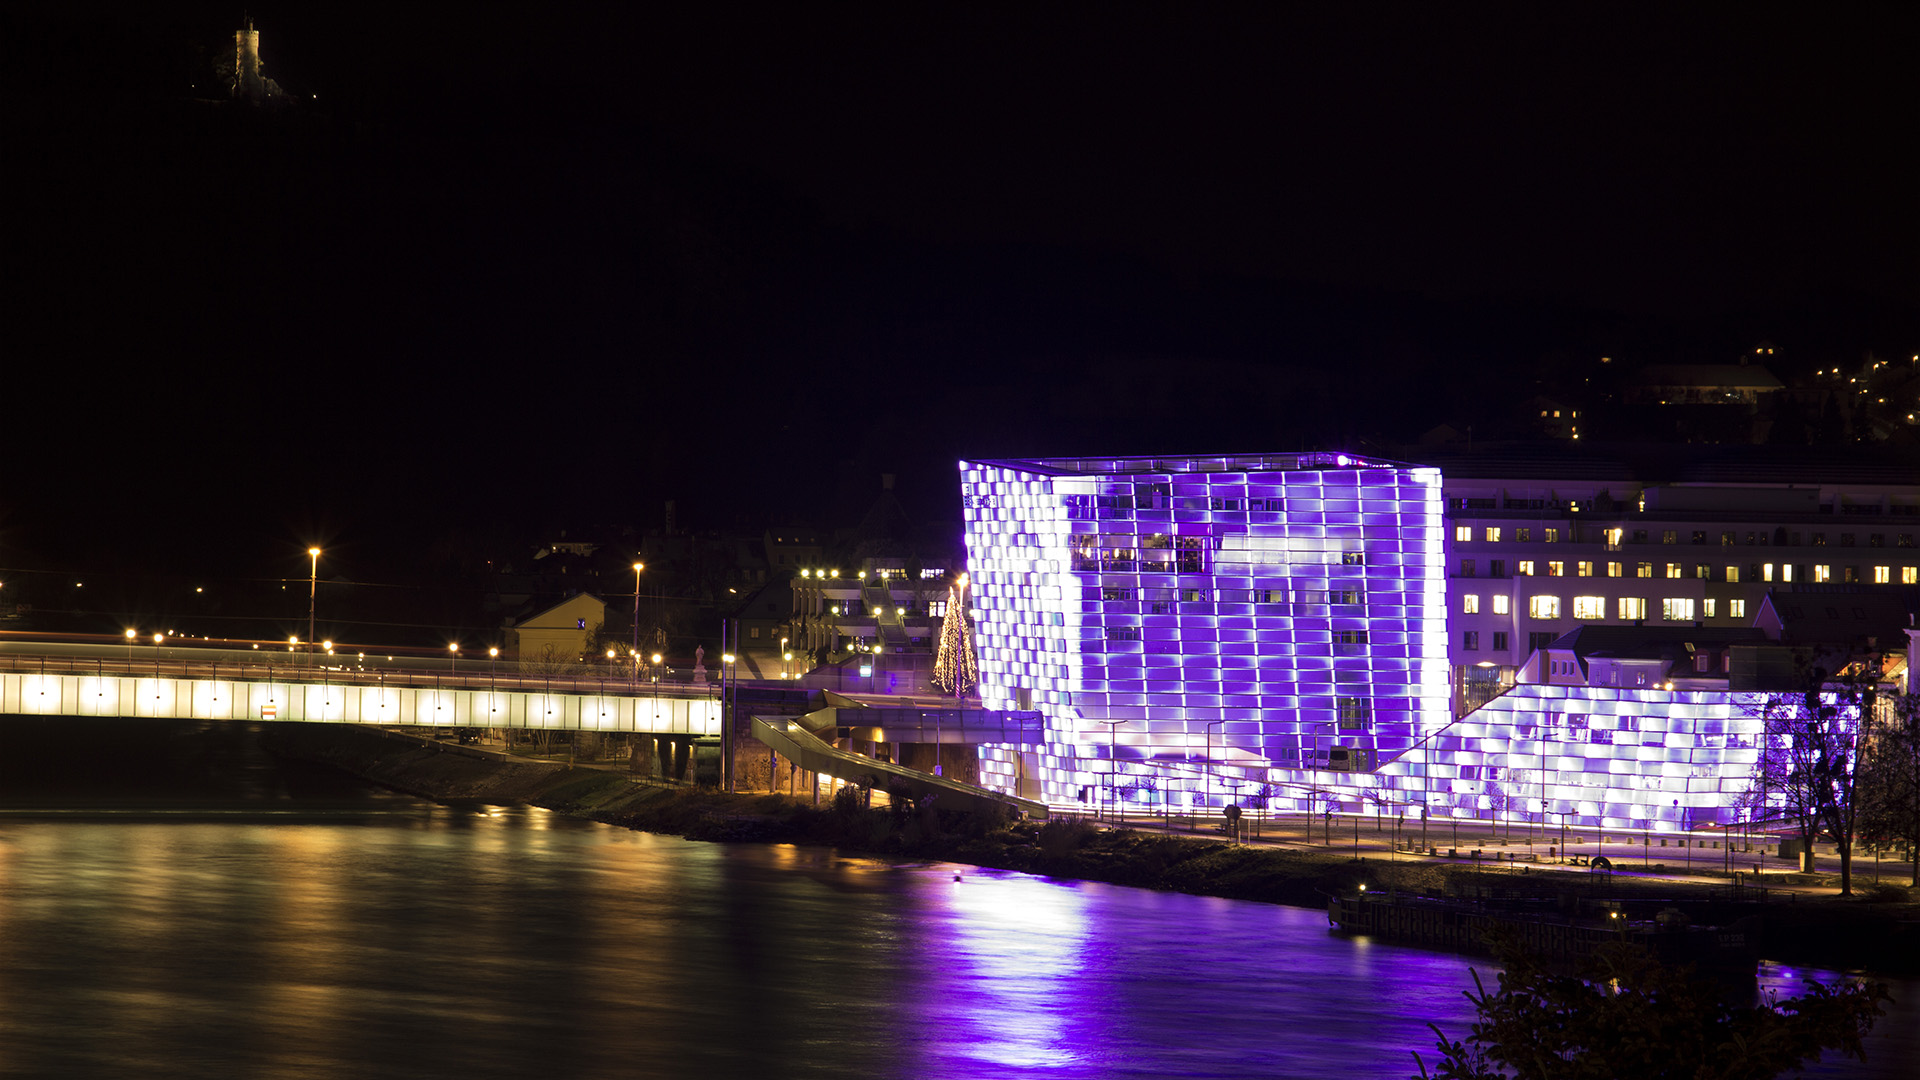 Ars Electronica Center @ night (15 sec. Exposure Time).